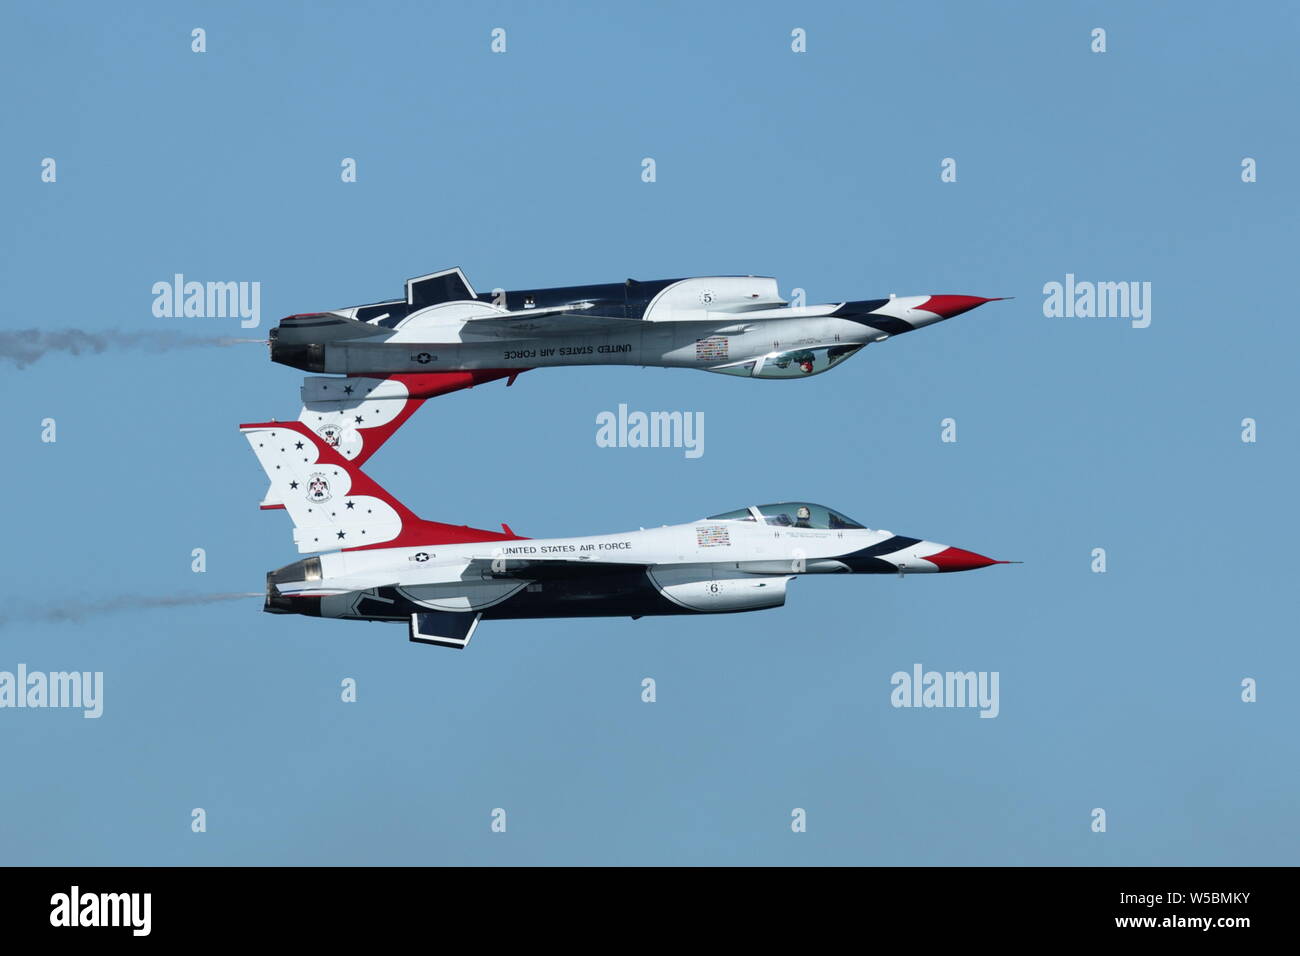 Air Force Thunderbirds performing a Calypso Pass in their F16C's at the Great Pacific Airshow in Huntington Beach, California on October 19, 2018 Stock Photo